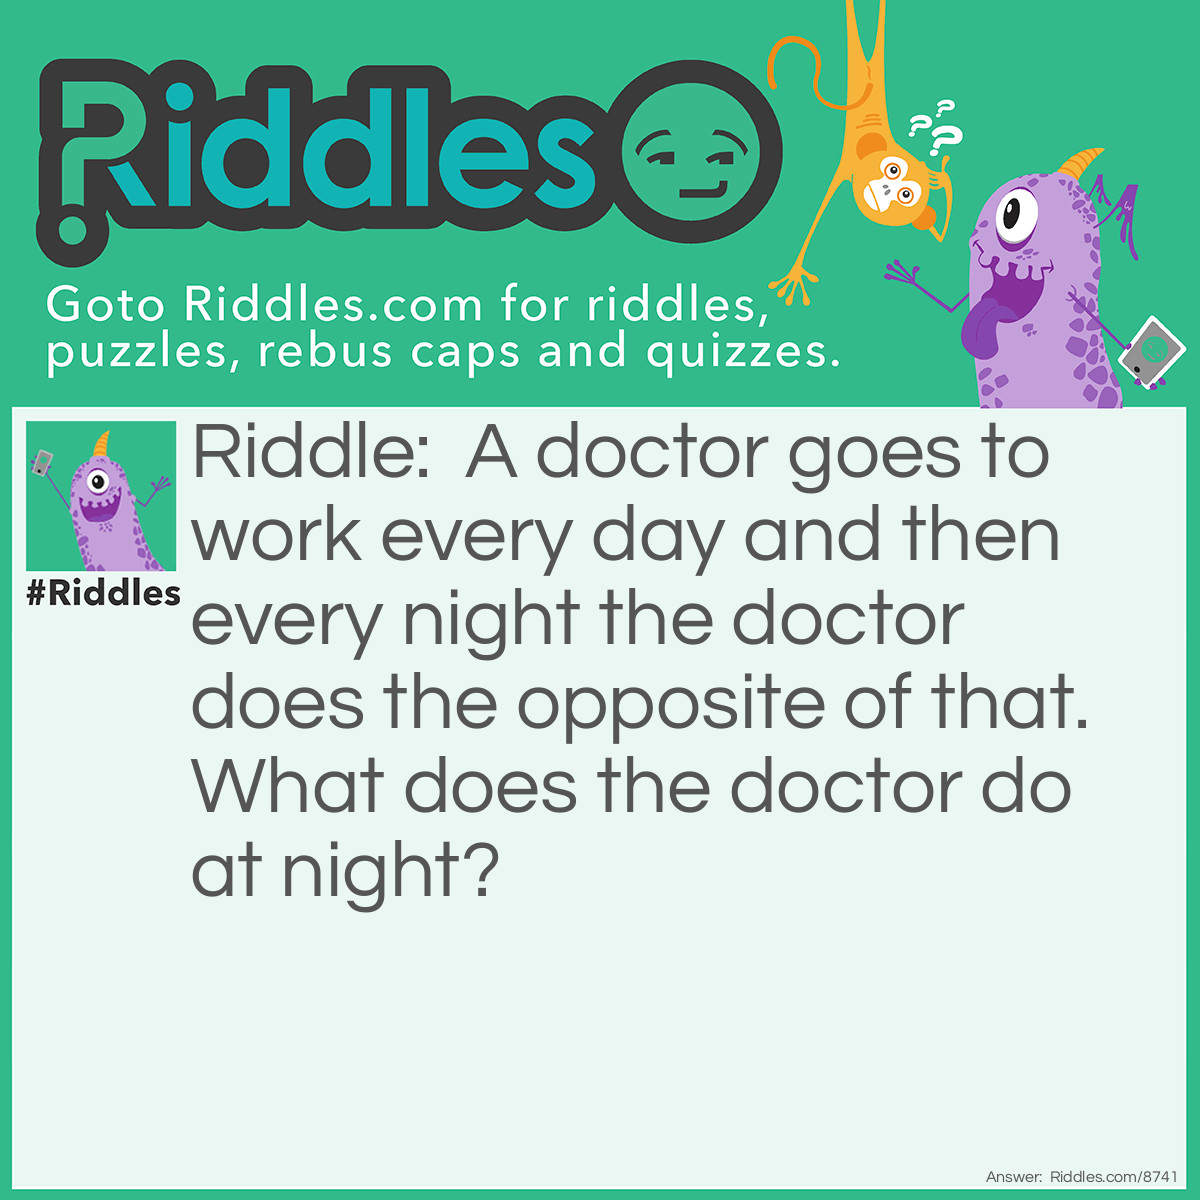 Riddle: A doctor goes to work every day and then every night the doctor does the opposite of that. What does the doctor do at night? Answer: Sewing